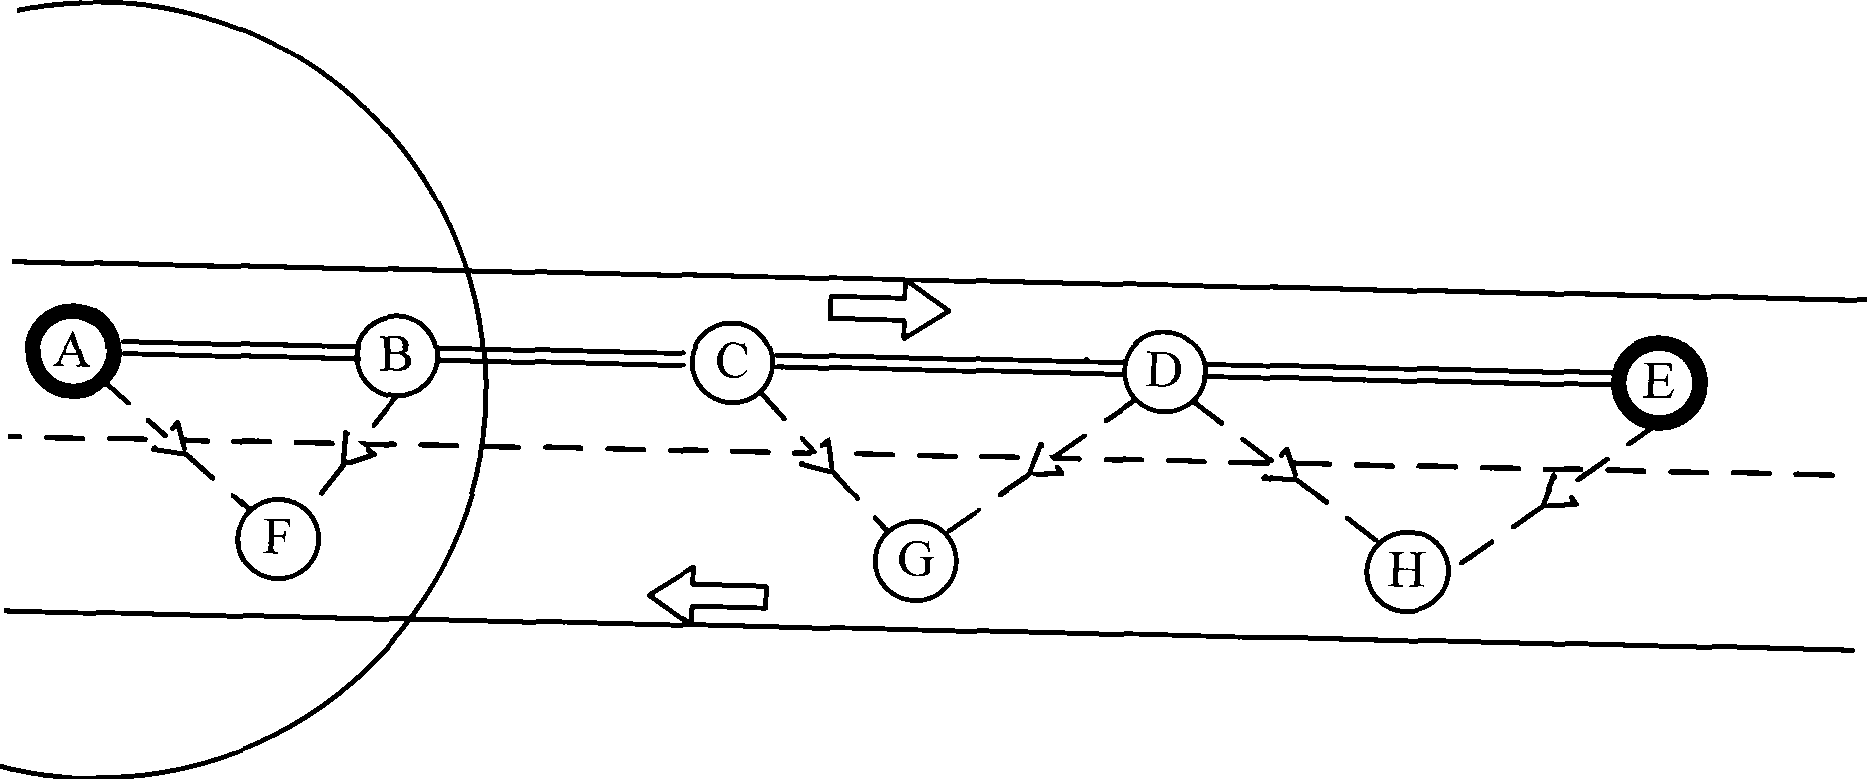 Method for selecting route of vehicle-mounted mobile ad hoc network based on direction information